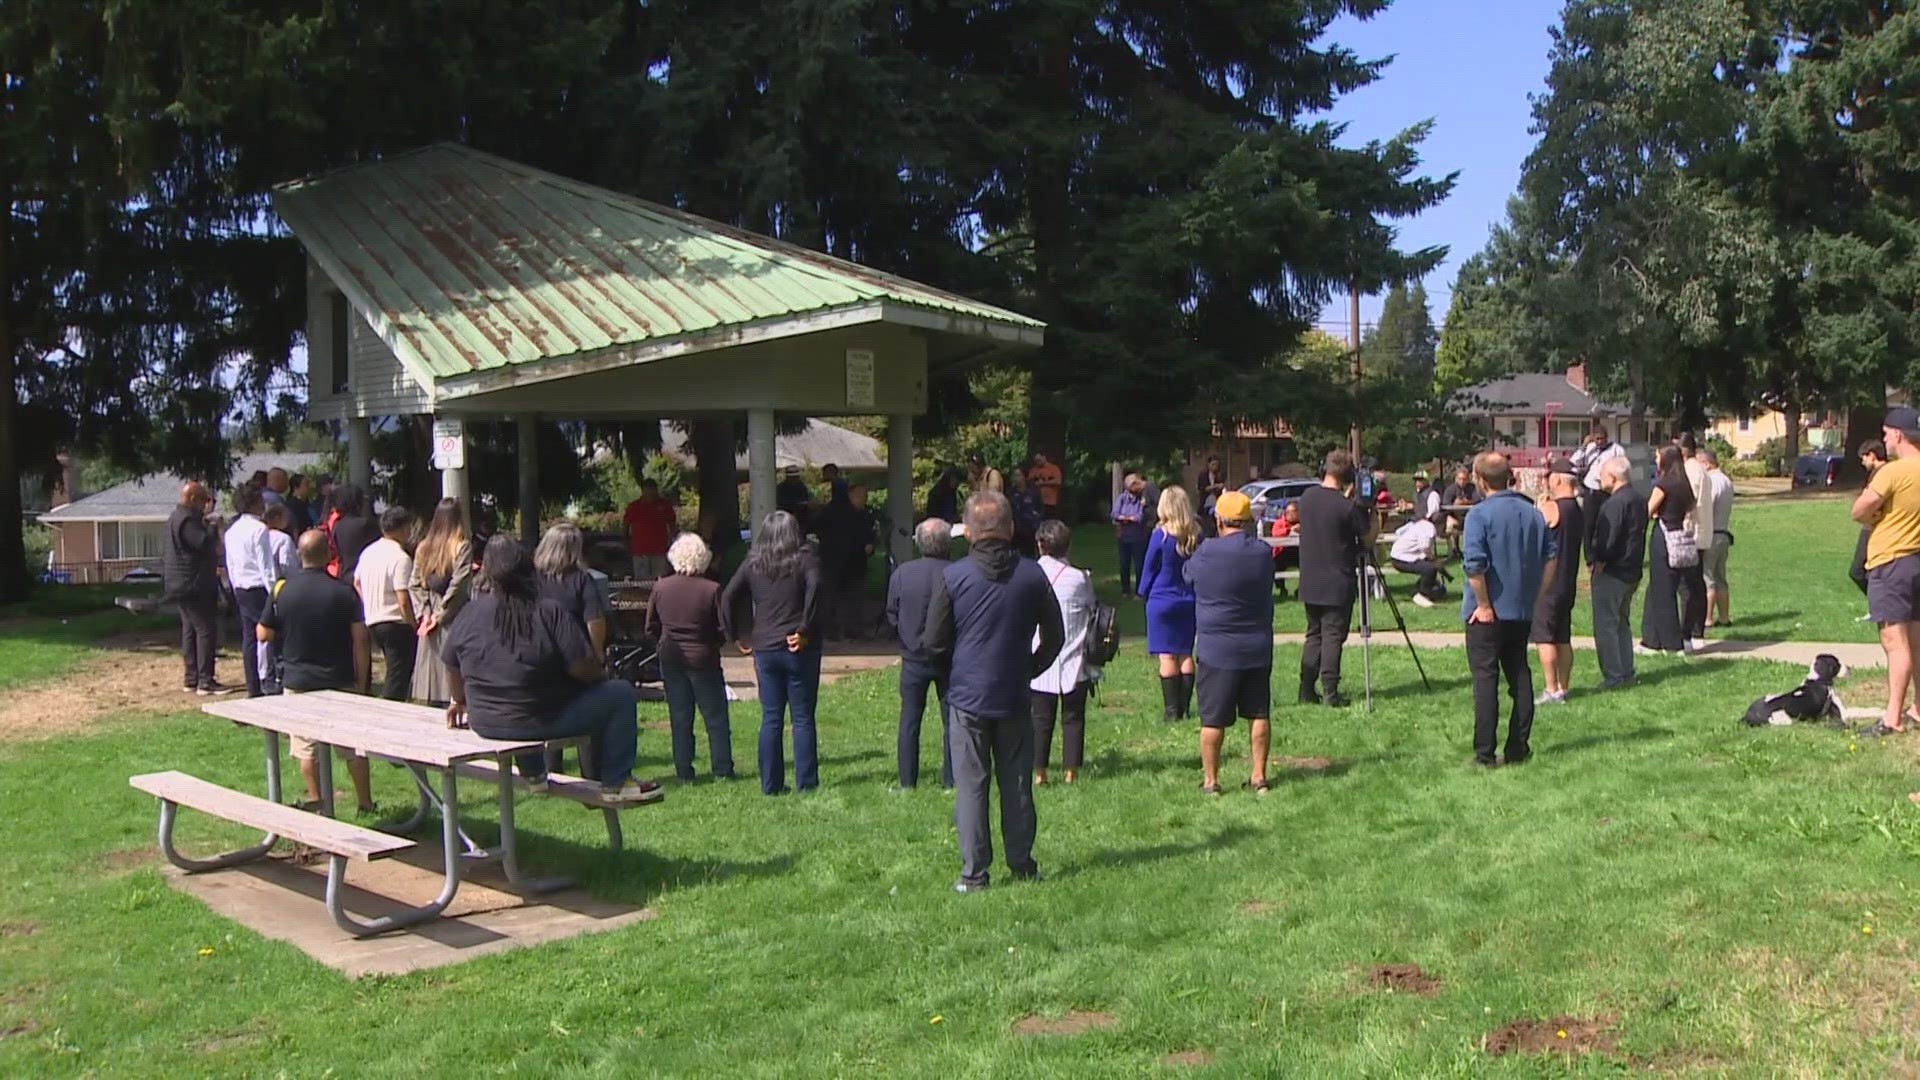 The gathering comes after recent violent crimes, including 14 robberies that happened between June and August in areas like Rainier Valley and Beacon Hill.